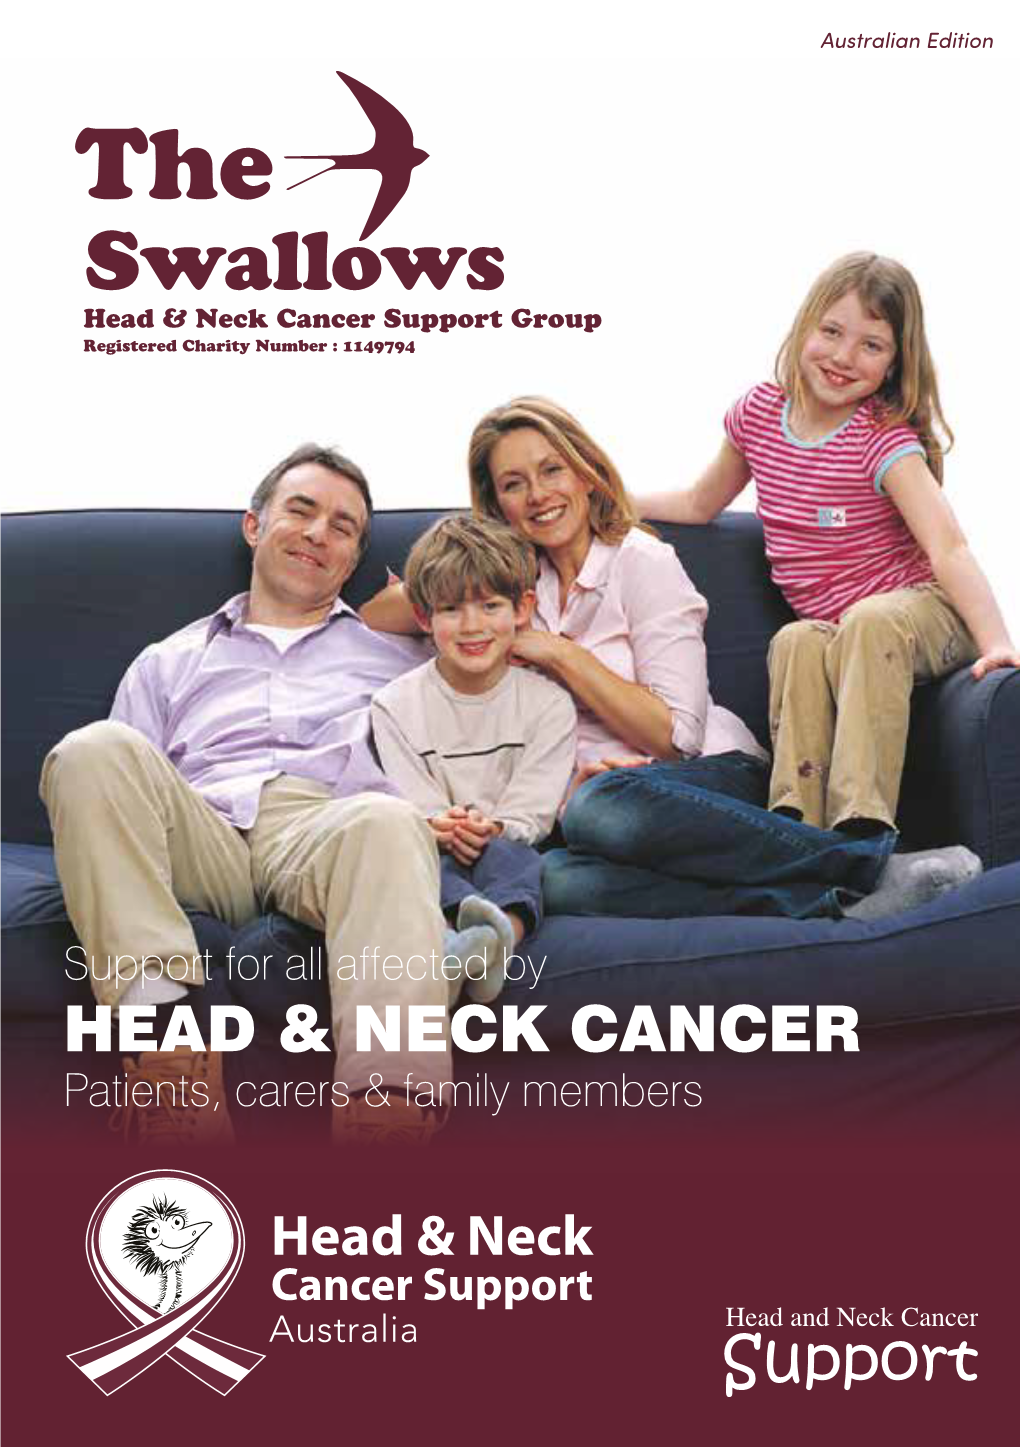 Swallows Head & Neck Cancer Support Group Registered Charity Number : 1149794